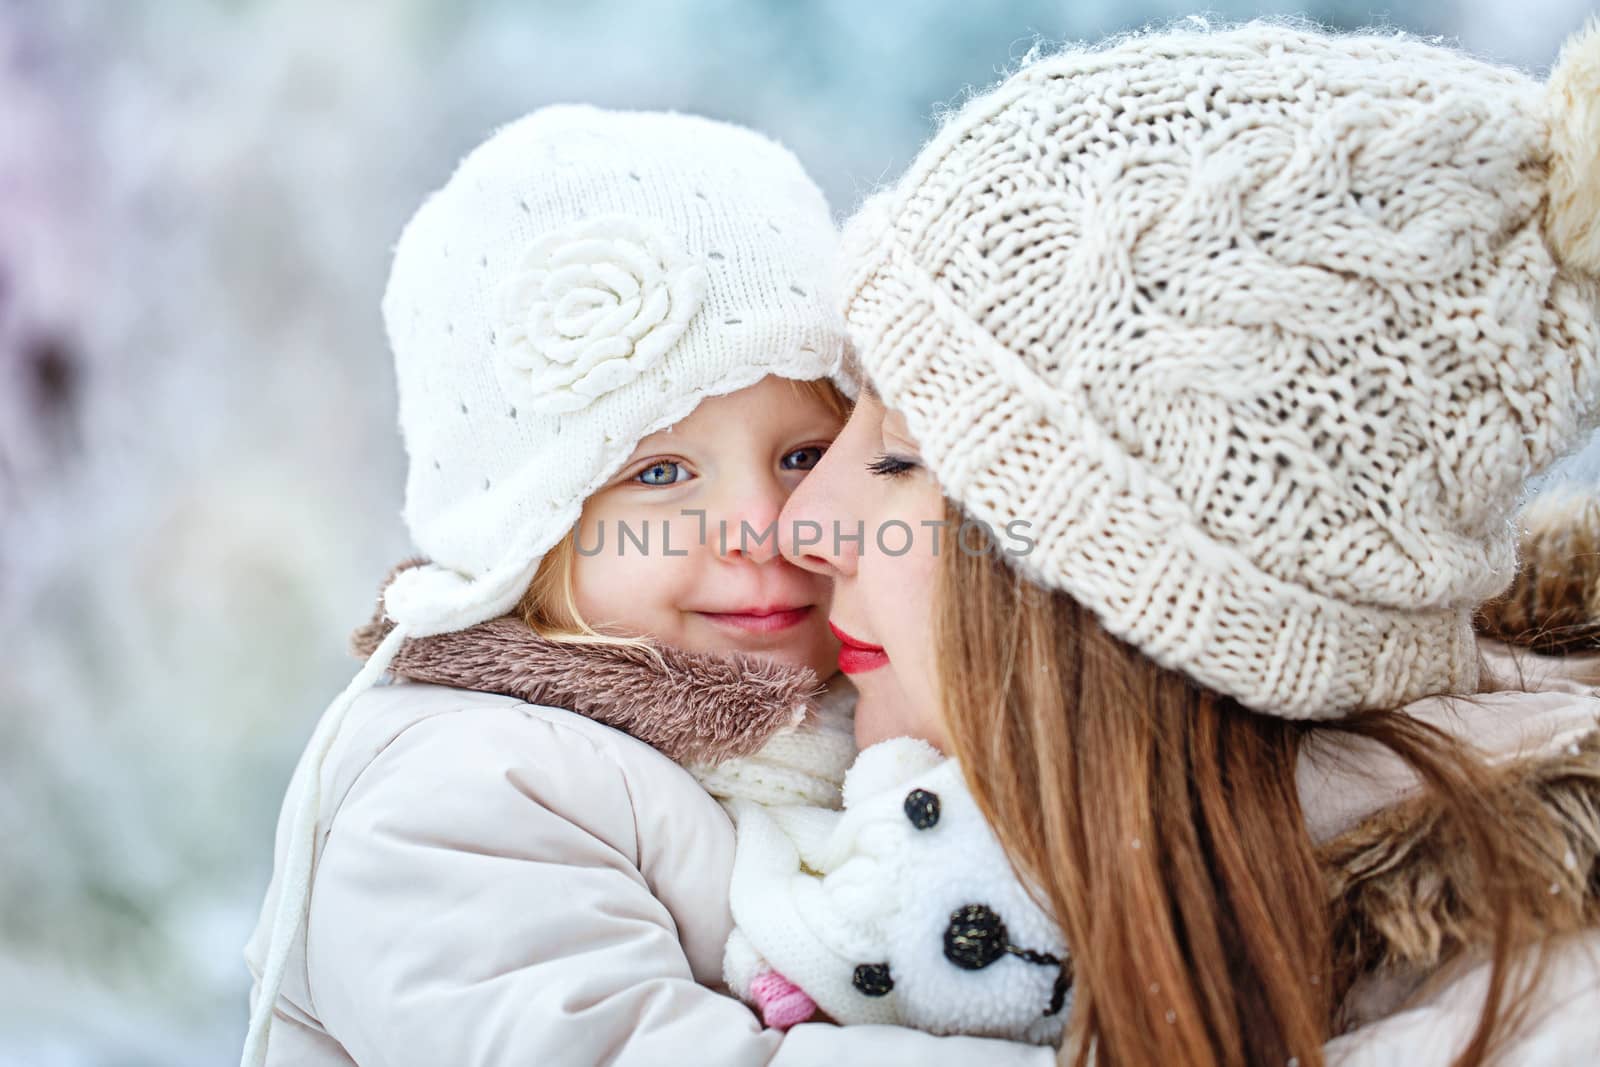 Mother holds daughter on hands in winter forest by Vagengeym